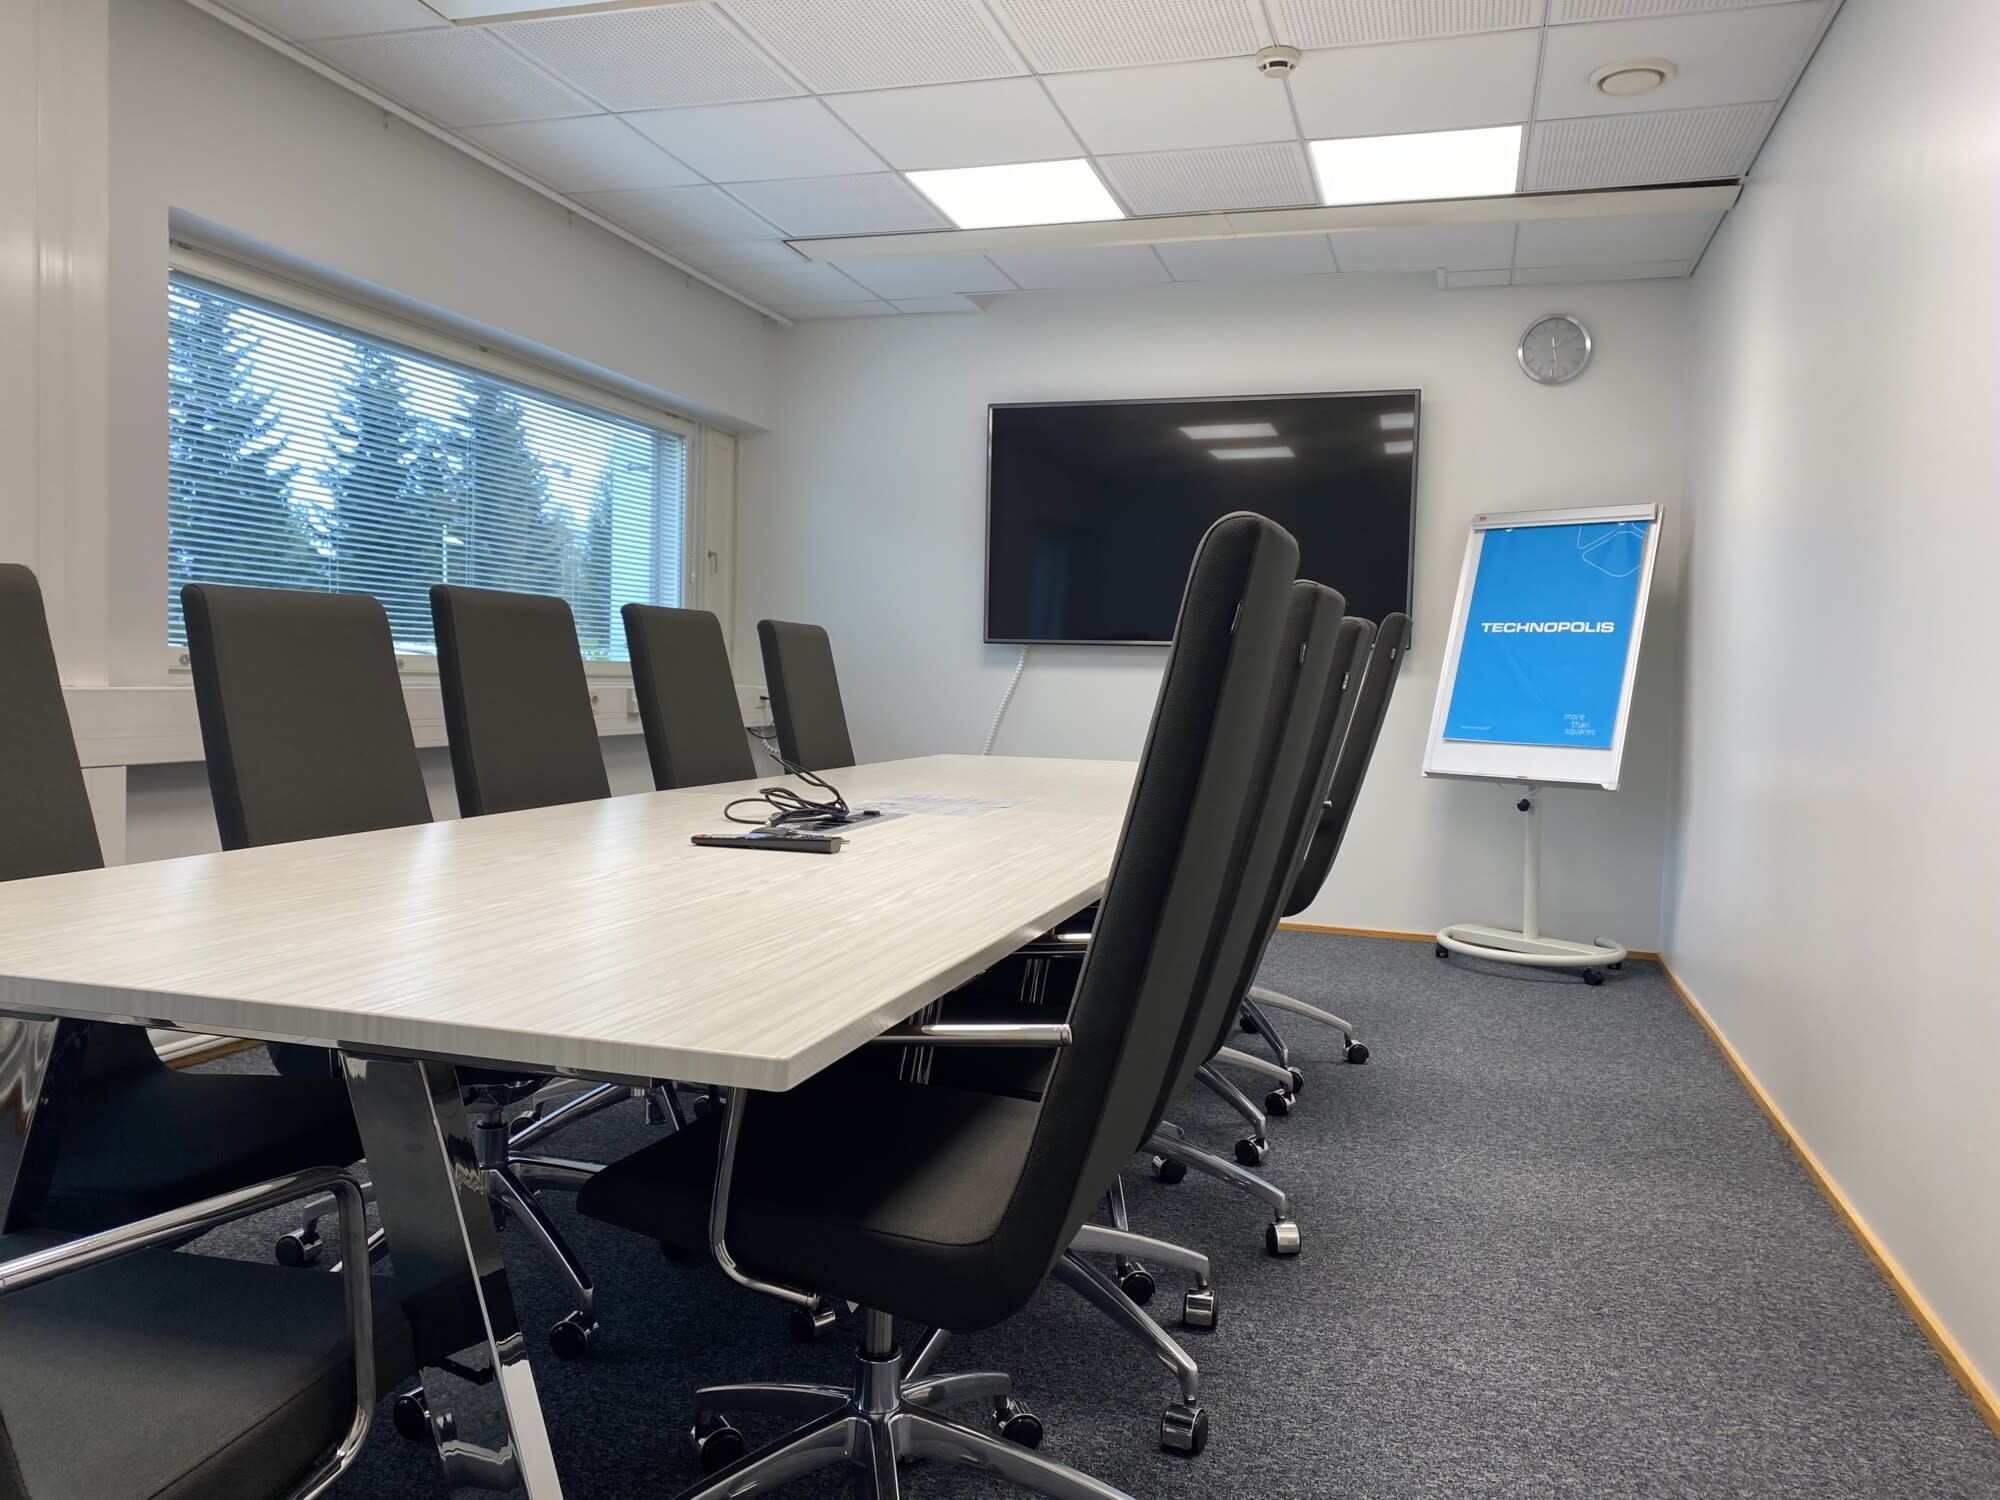 Meeting room for 11 persons with diplomat table. The room includes high speed Wi-Fi, LCD-screen and a flip chart and materials for taking notes.